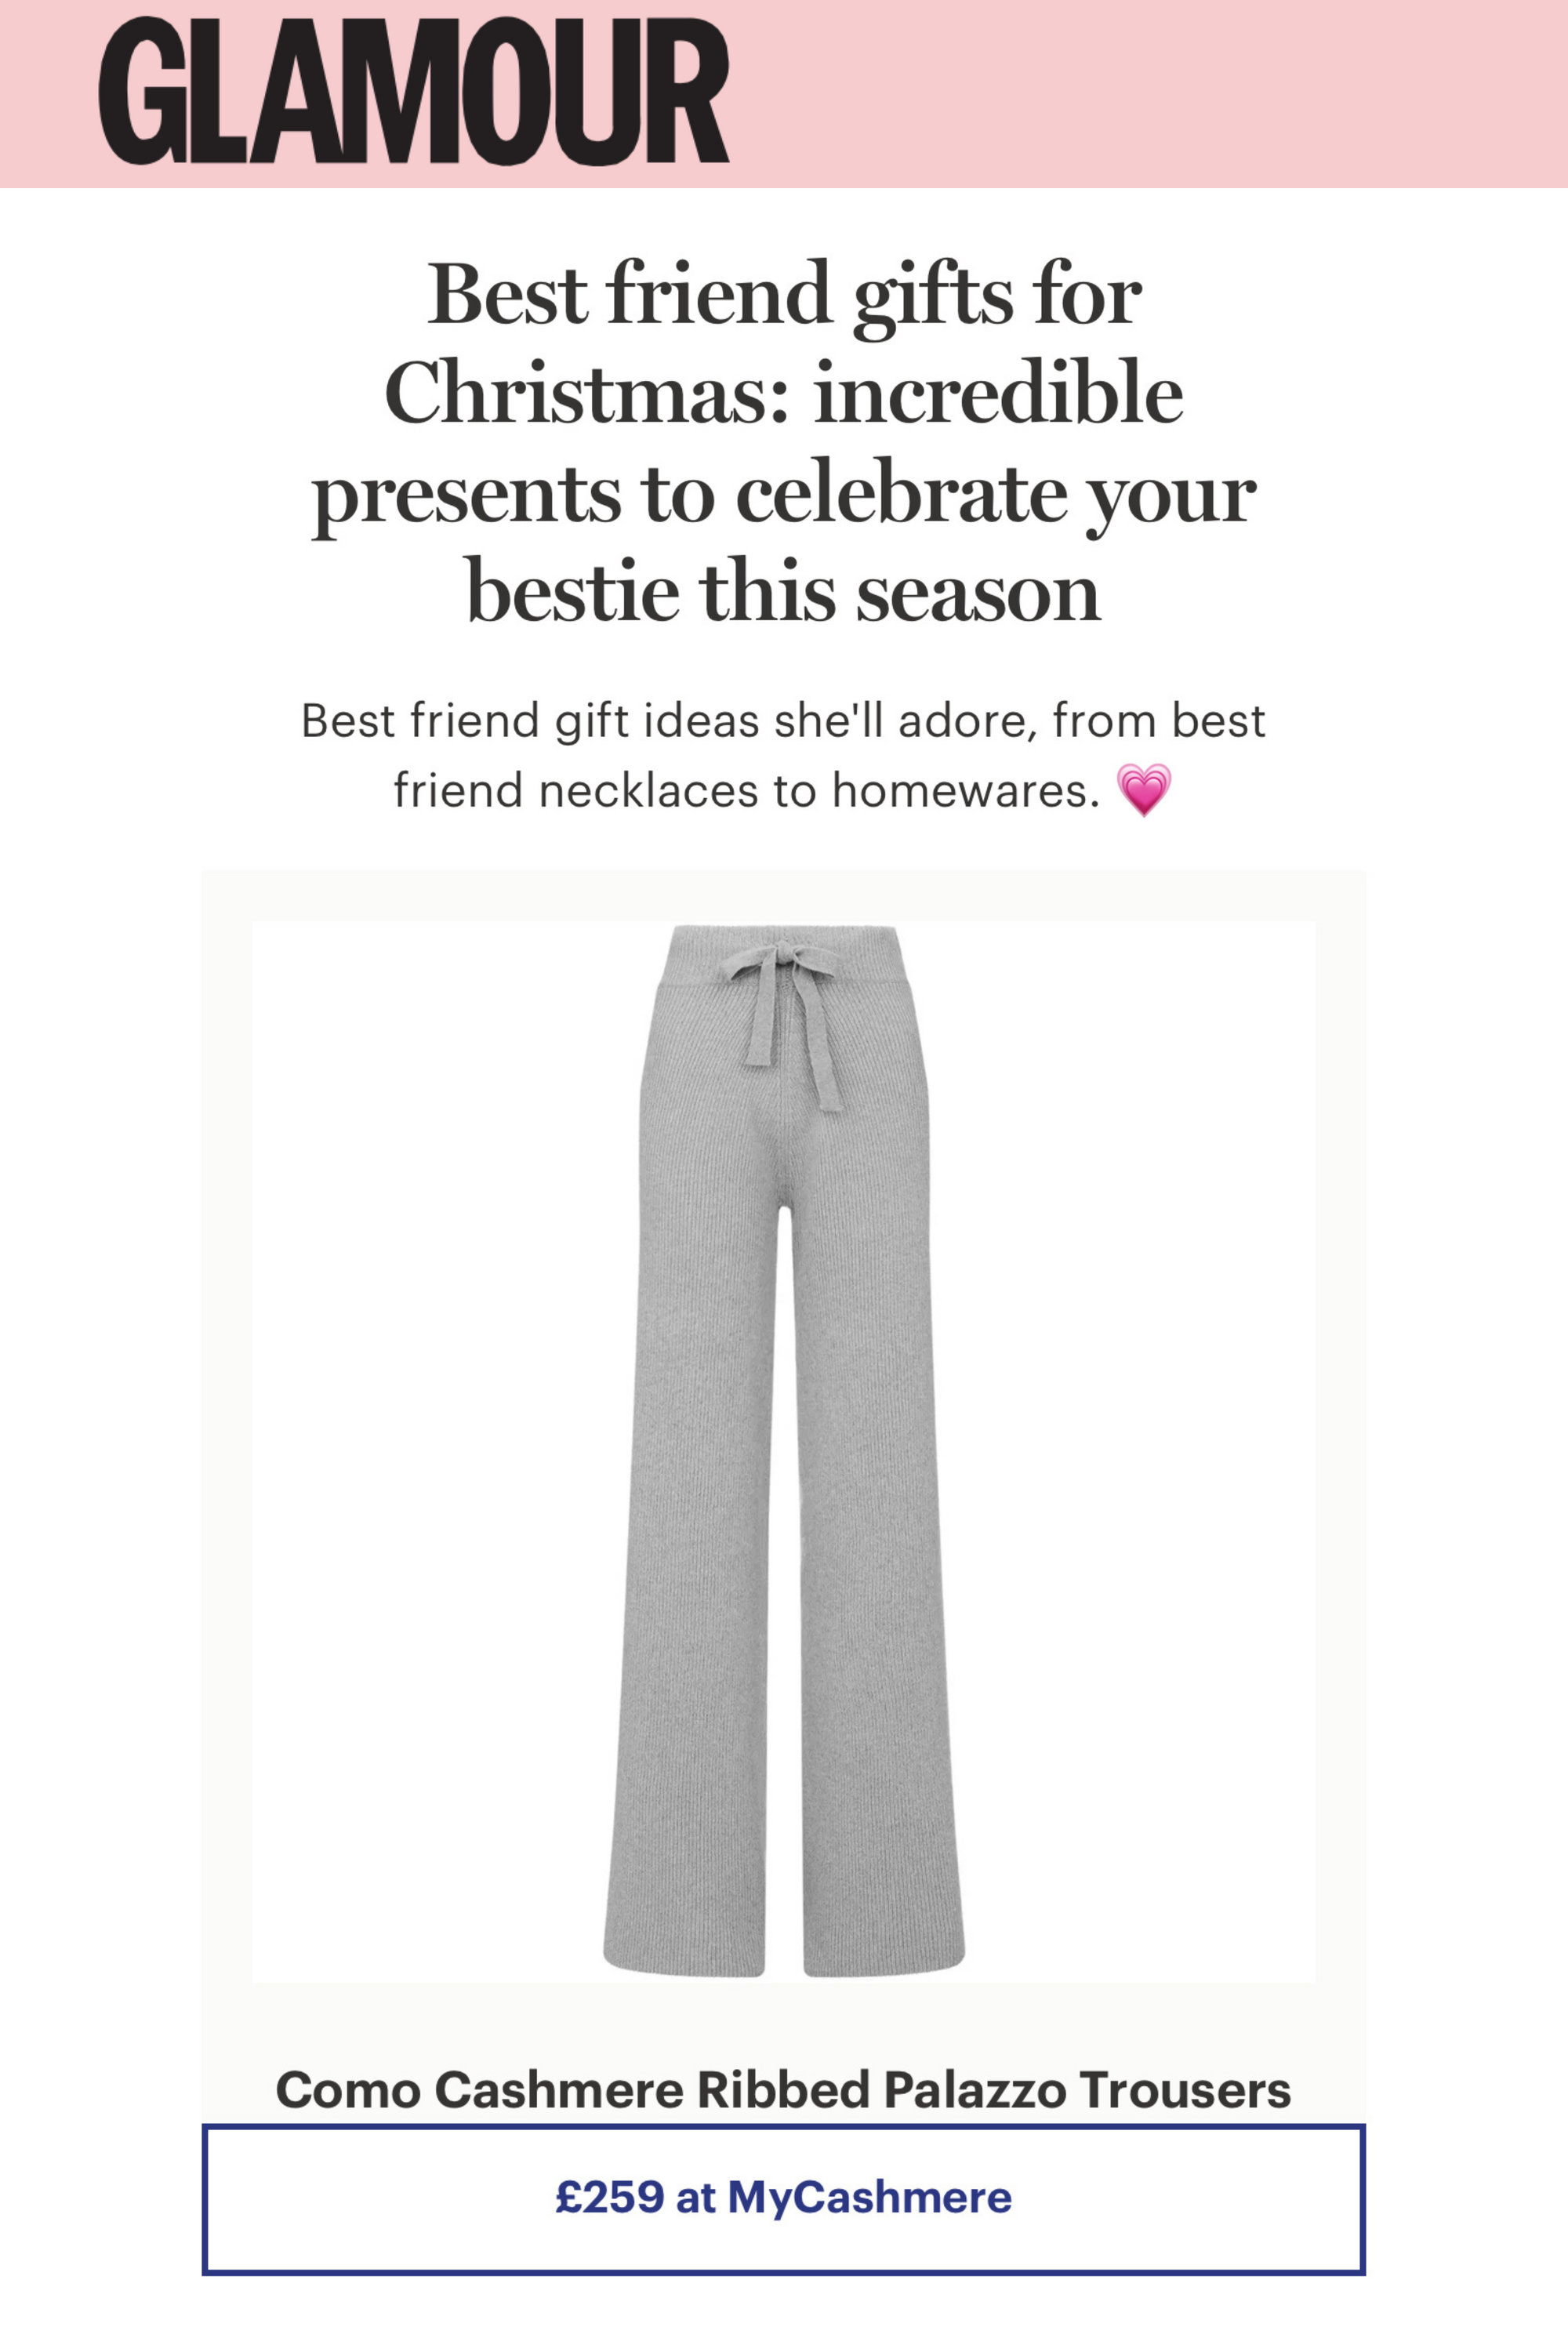 GLAMOUR | BEST FRIEND GIFTS FOR CHRISTMAS